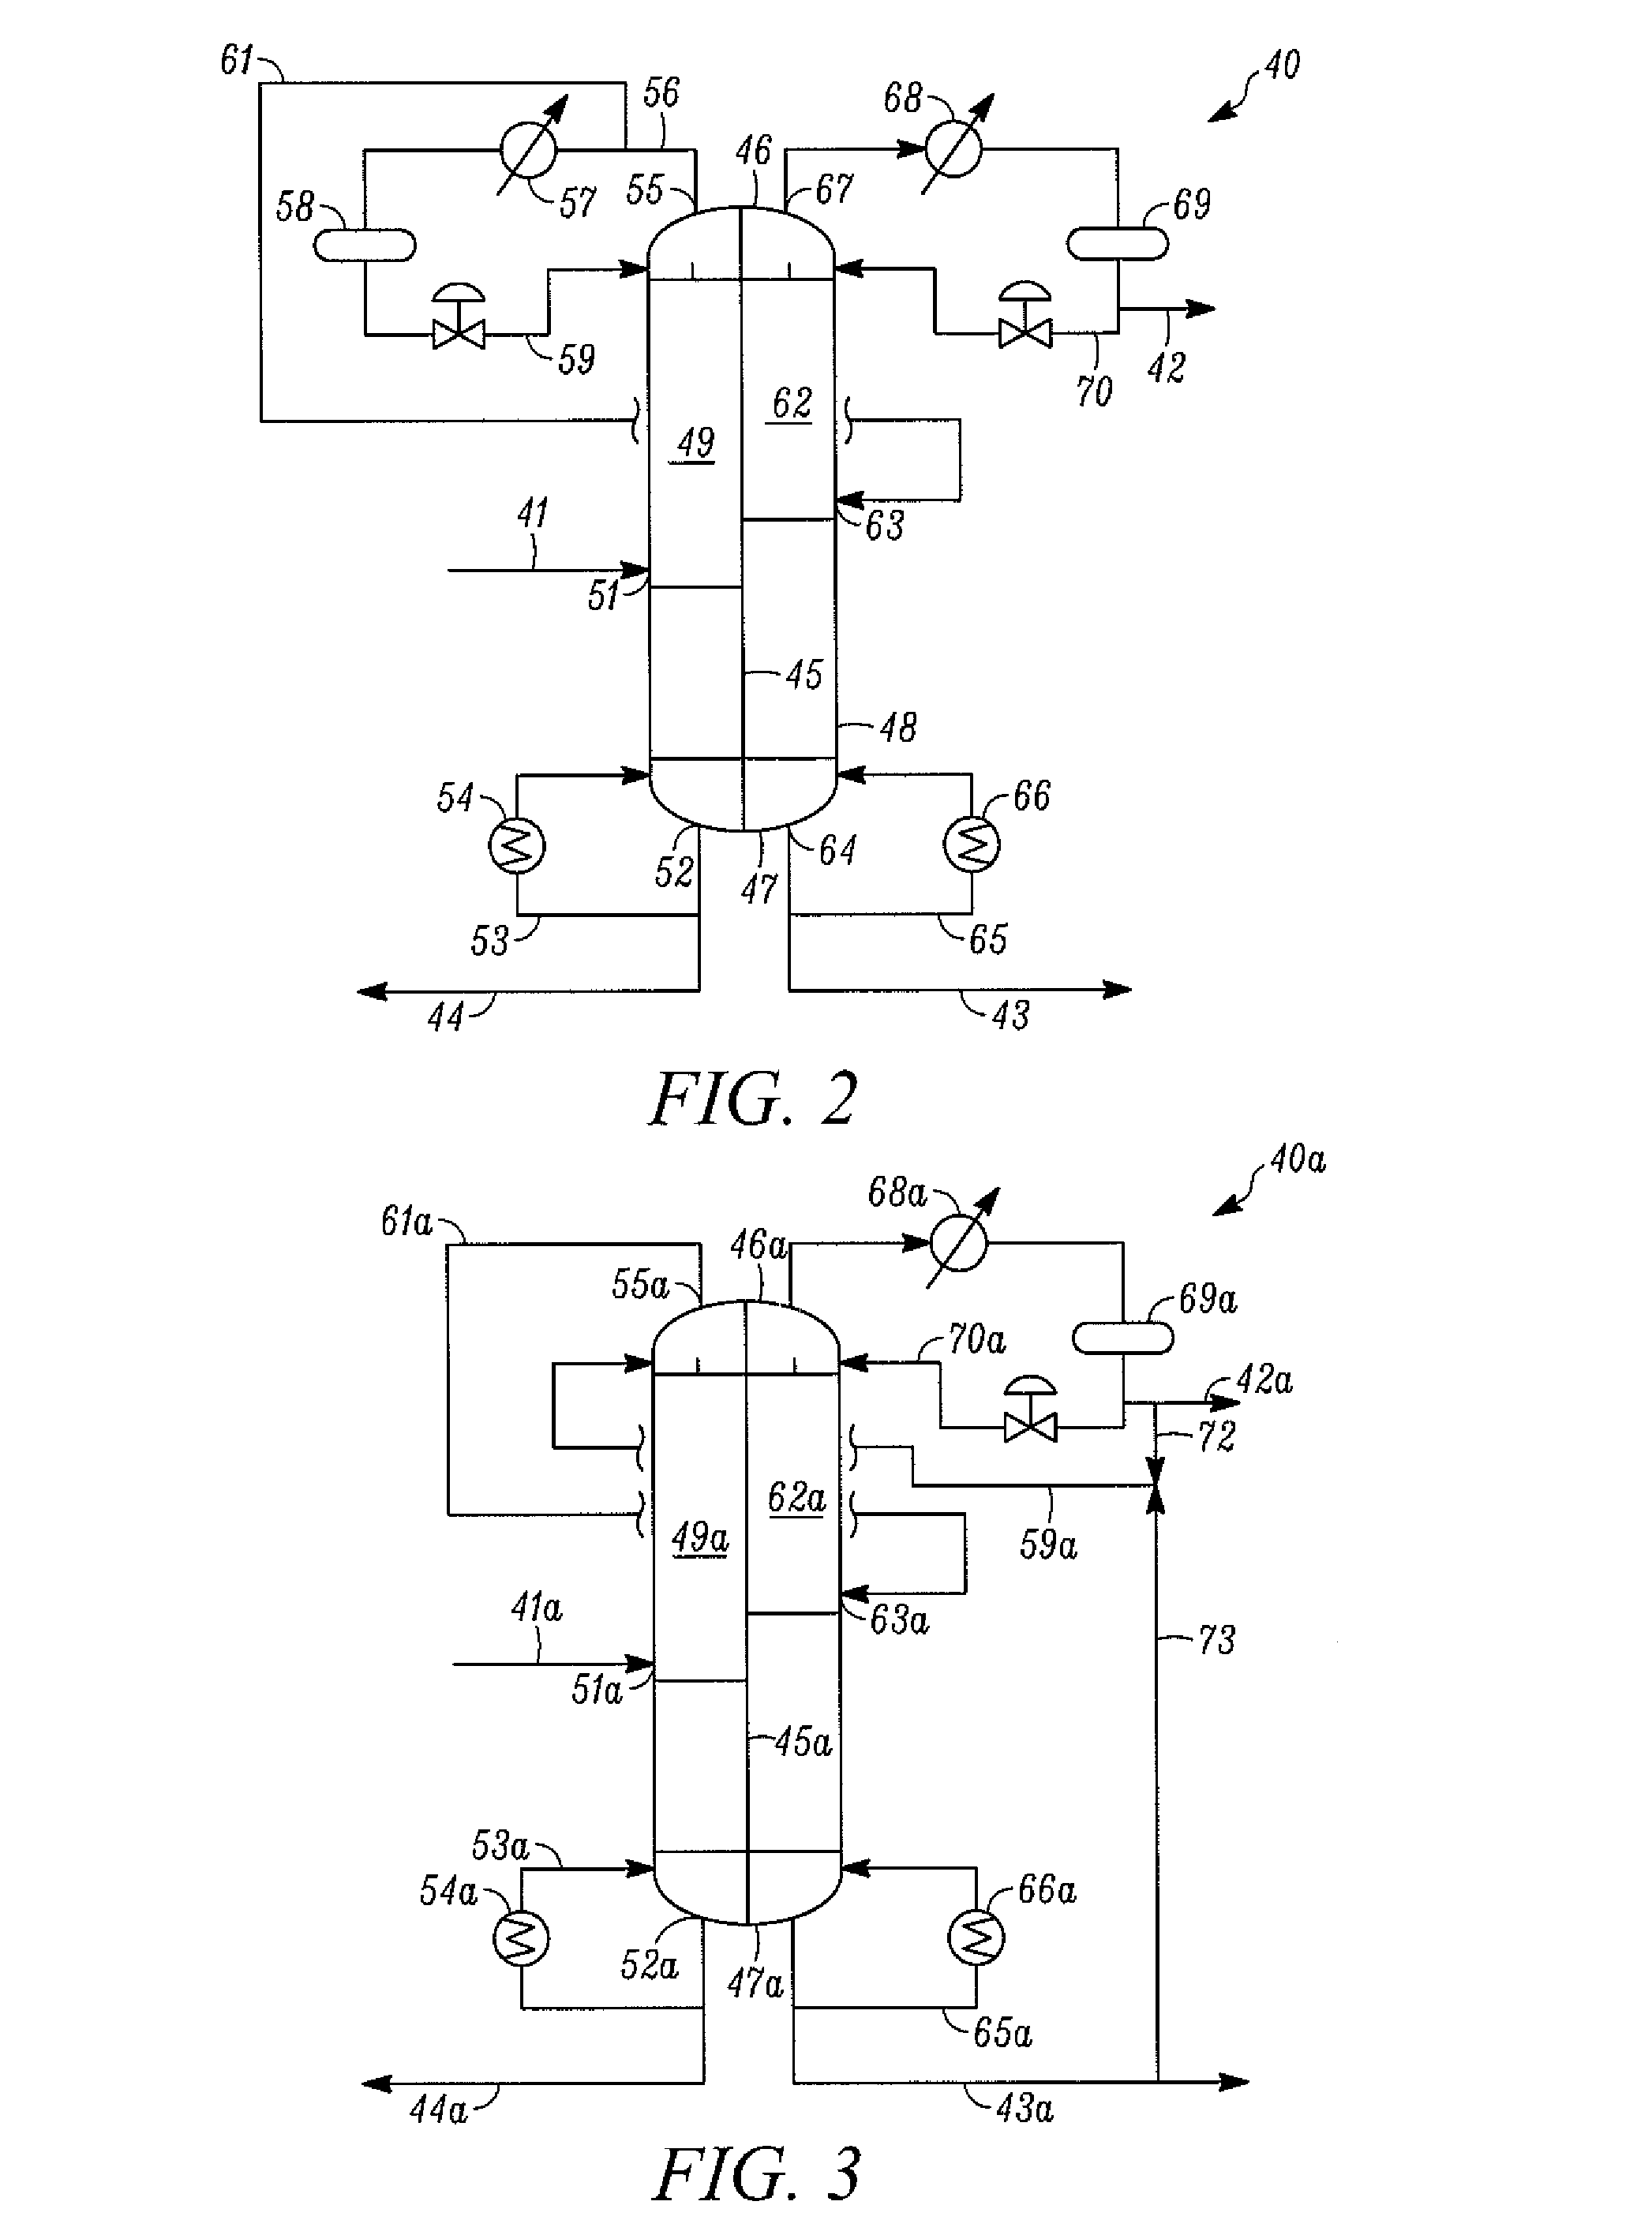 Apparatus and Methods for Separating Butene-1 from a Mixed C4 Feed